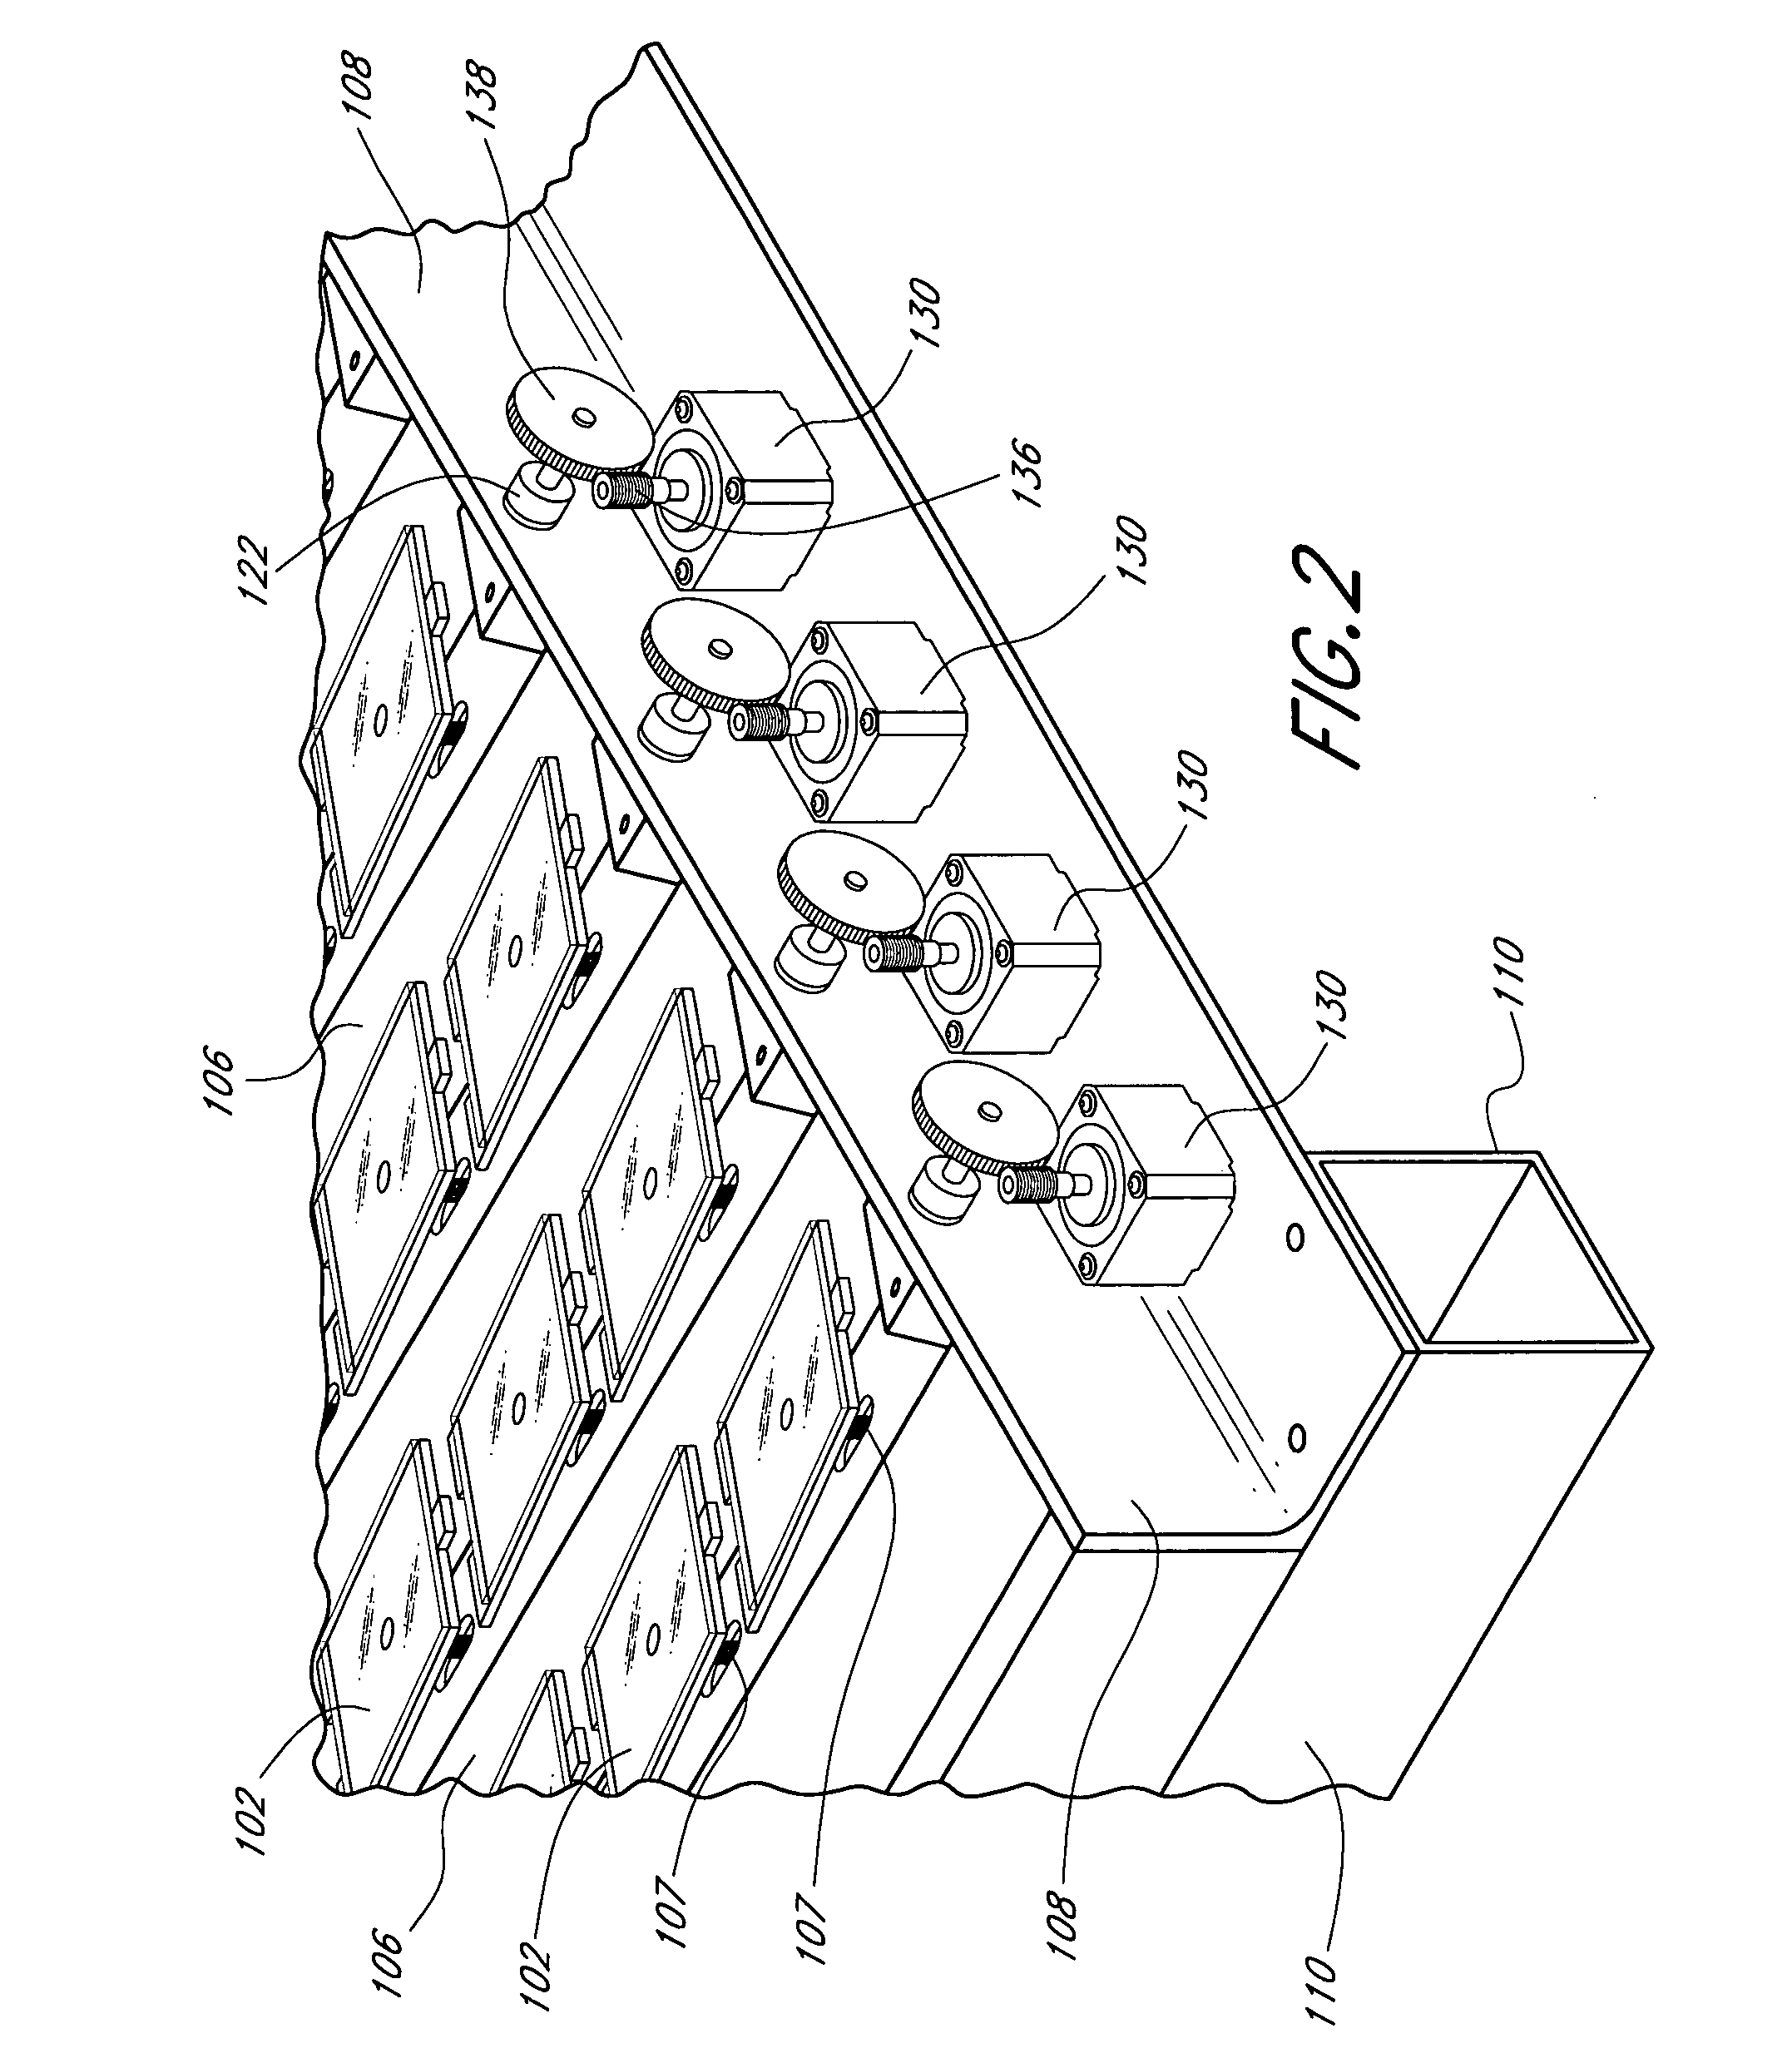 Solar concentrator array with grouped adjustable elements